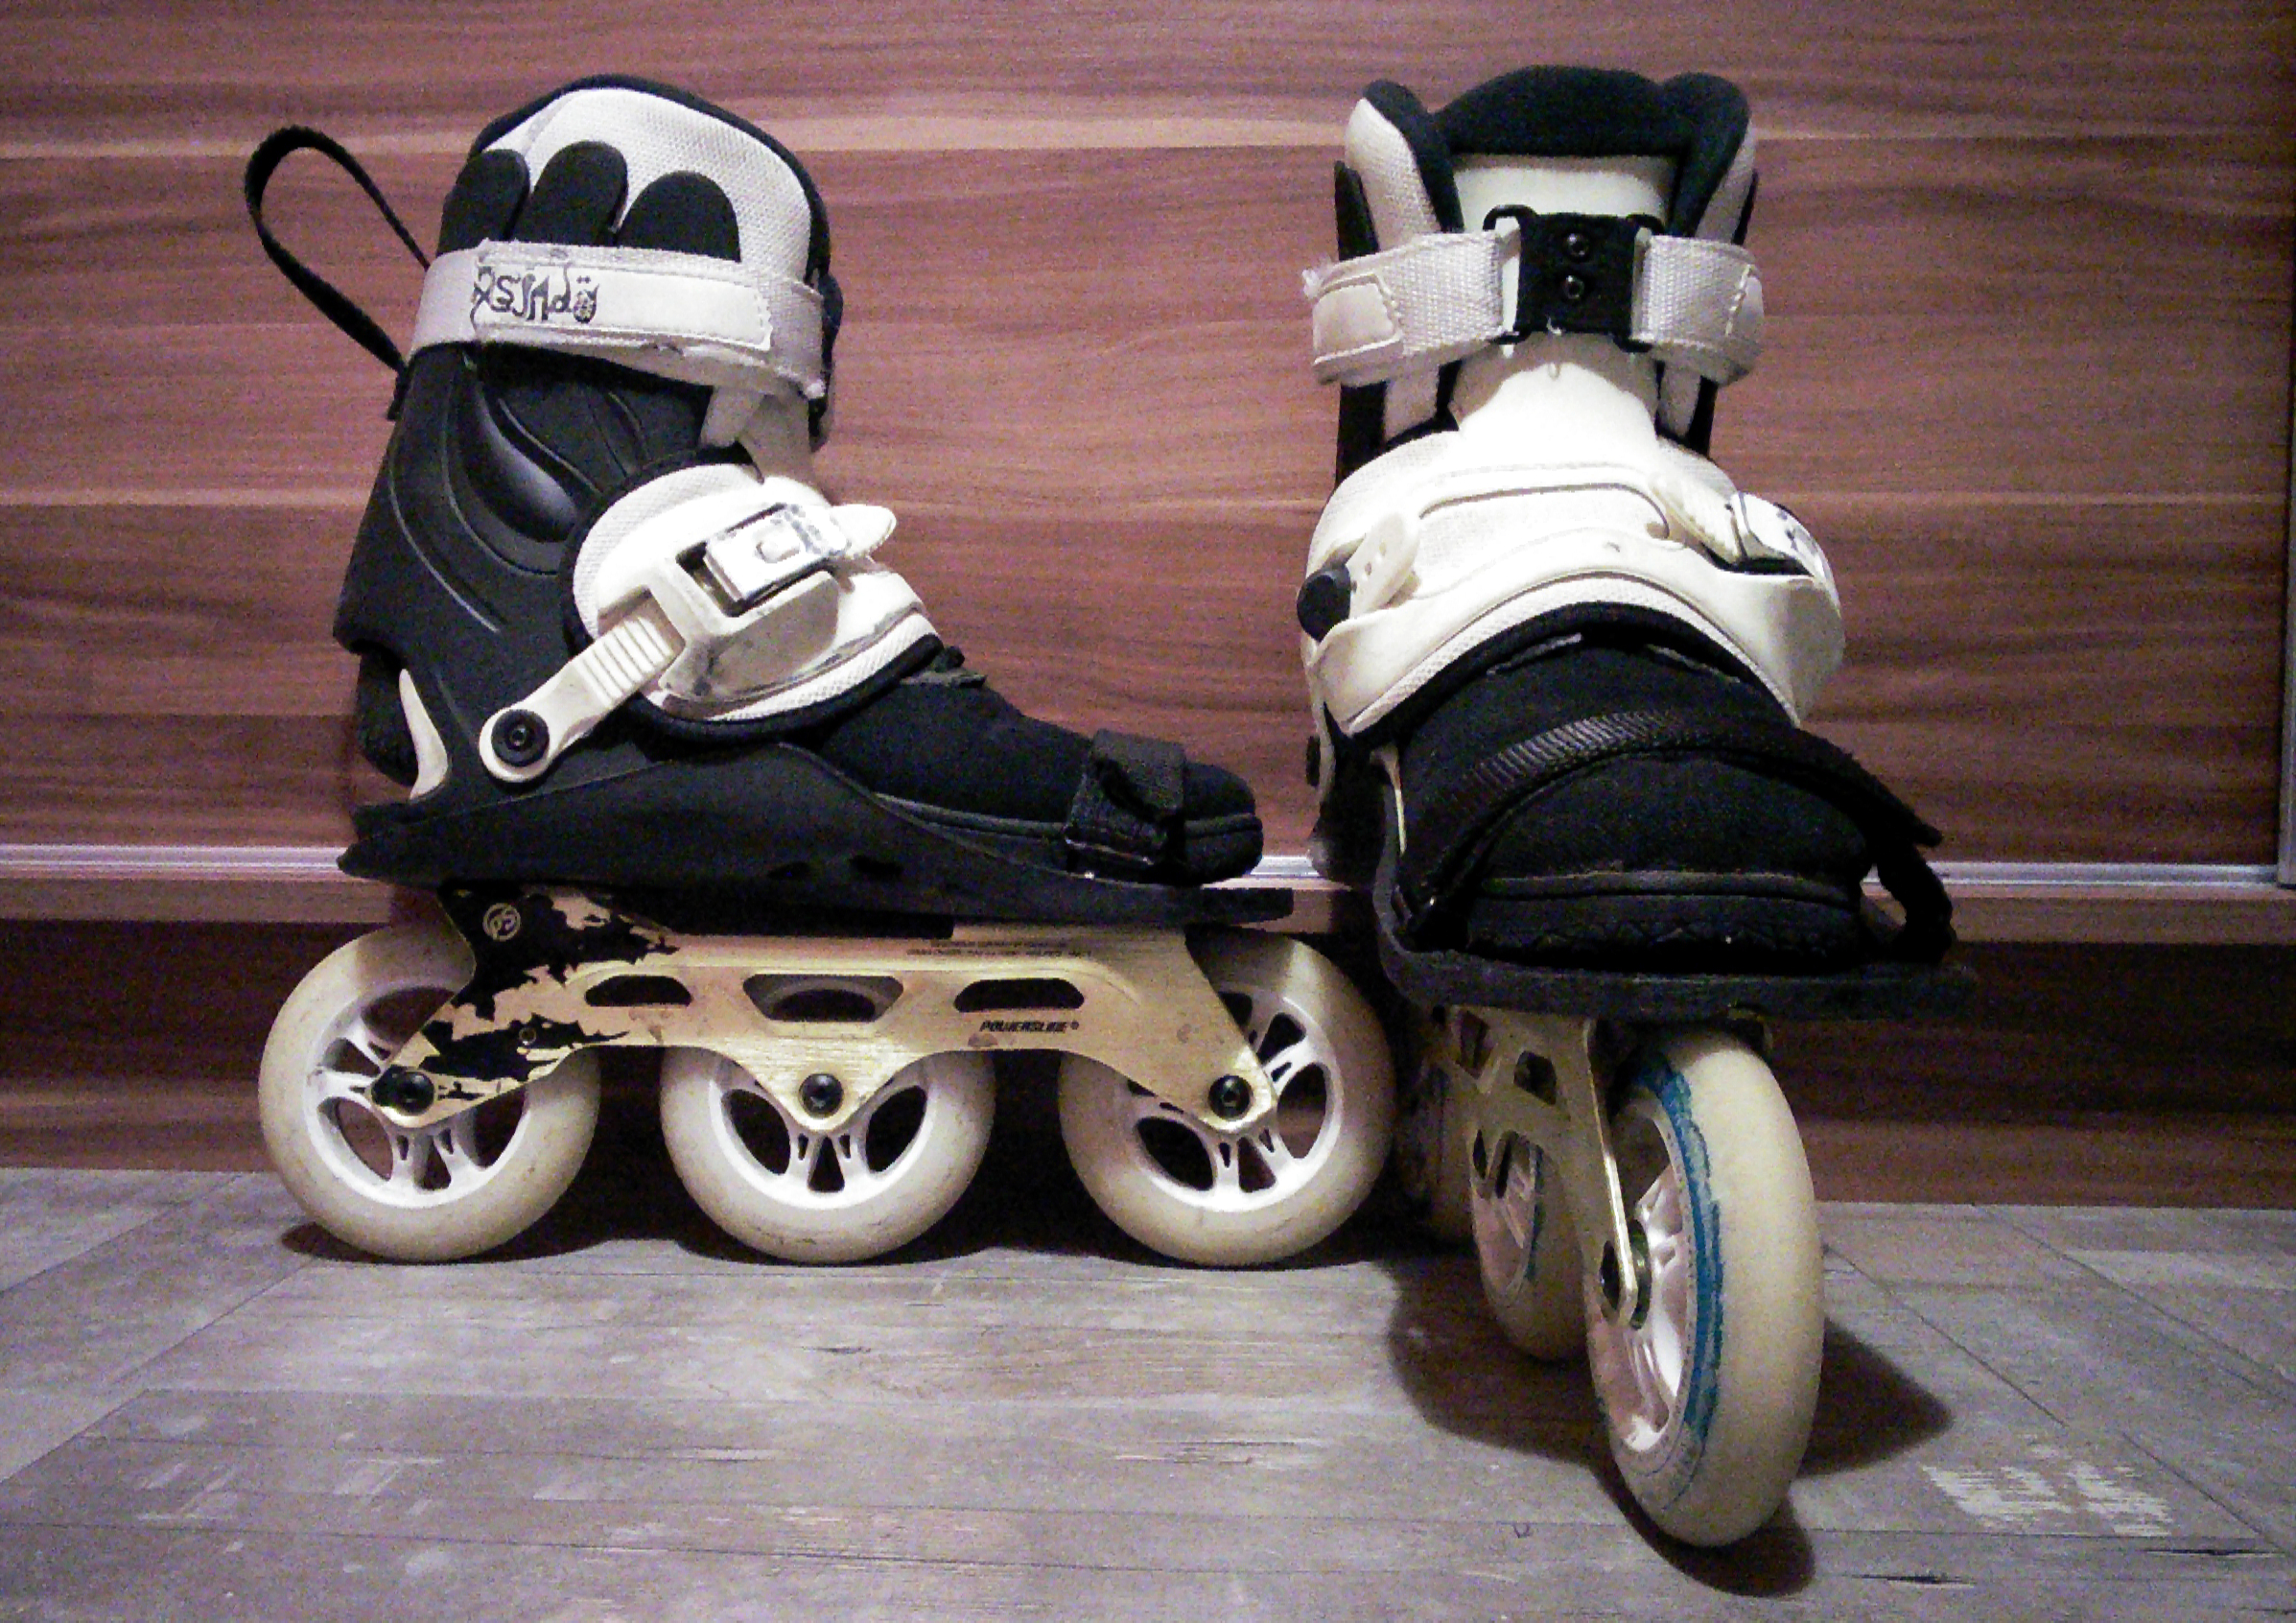 3 wheeler skates This game is great fun and its really cool. 